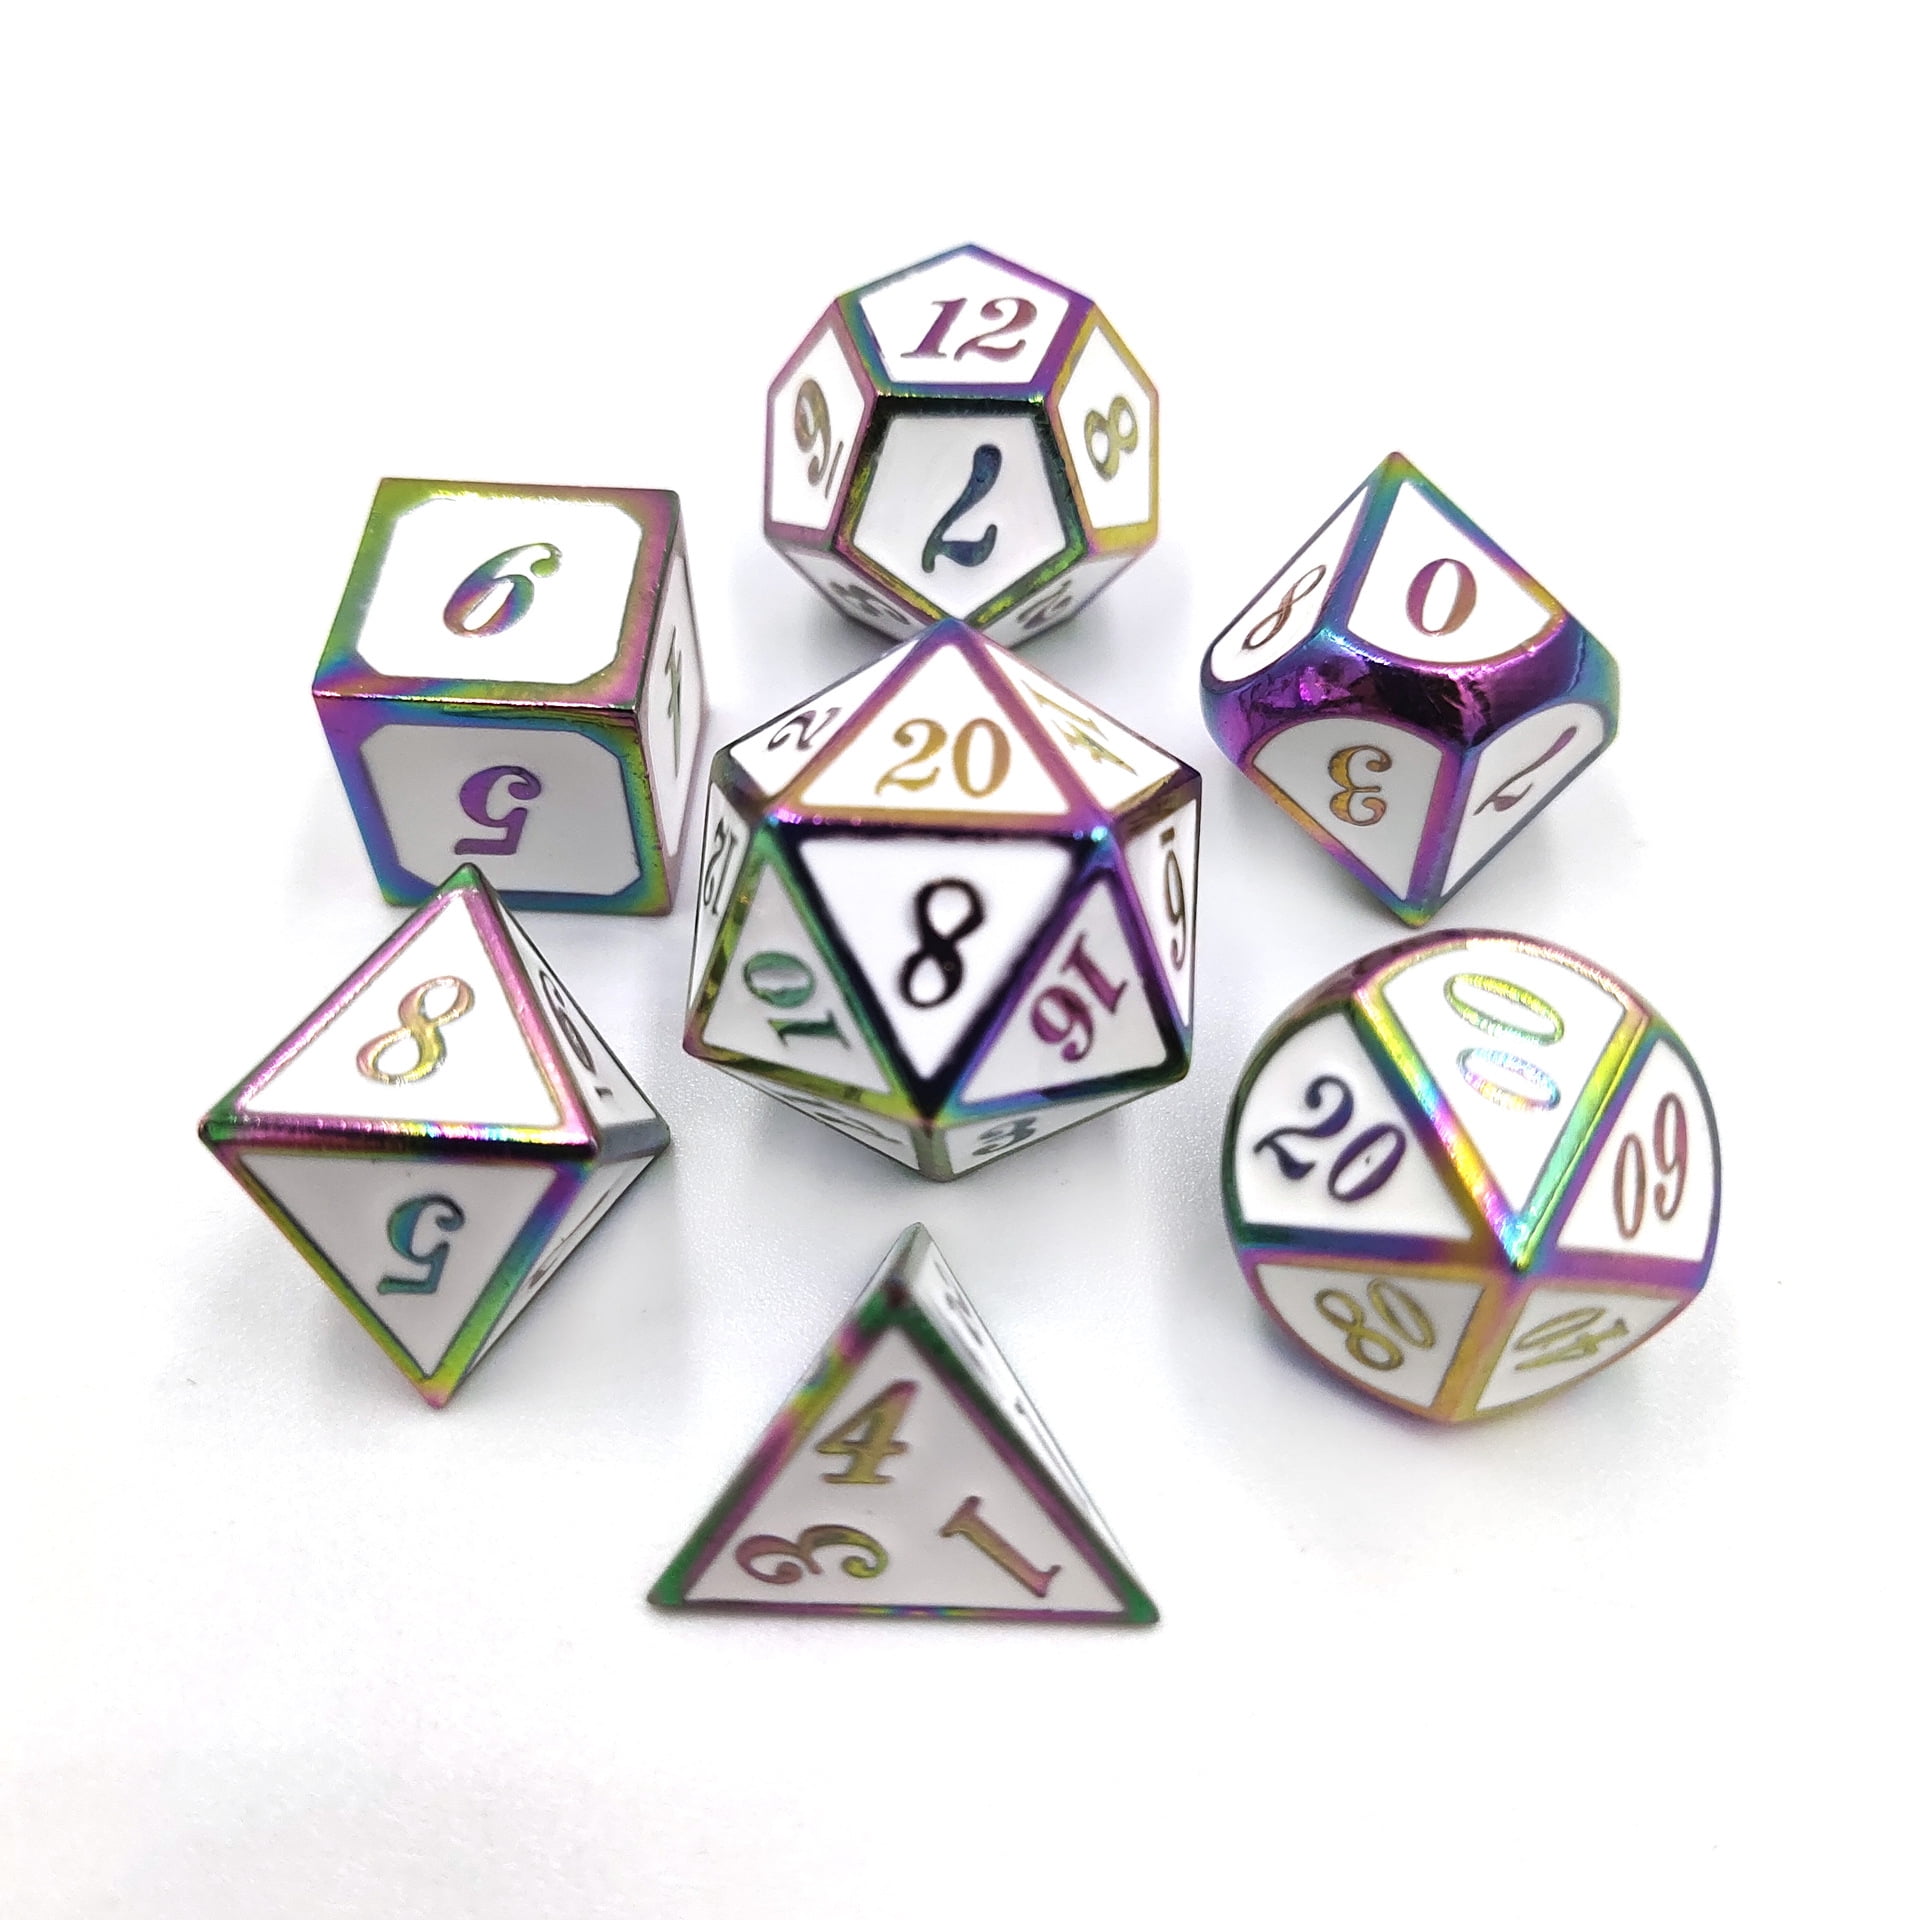 7pcs Polyhedral Dice Multi-sided Metal for Dragon Scales Pathfinder Dices C 